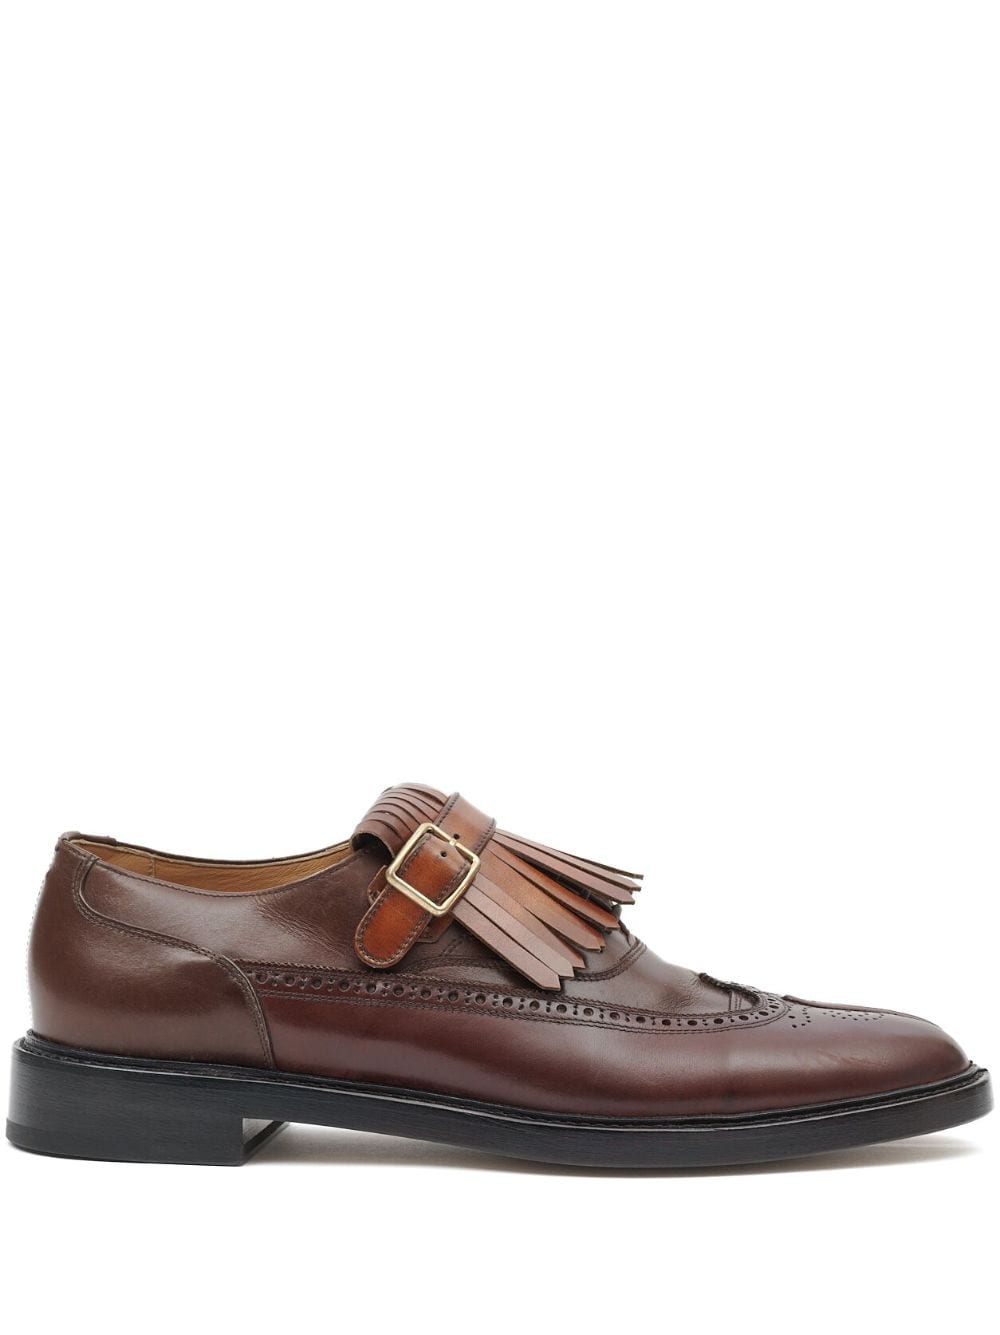 Maison Margiela Tabi Monster fringed leather brogues Brown